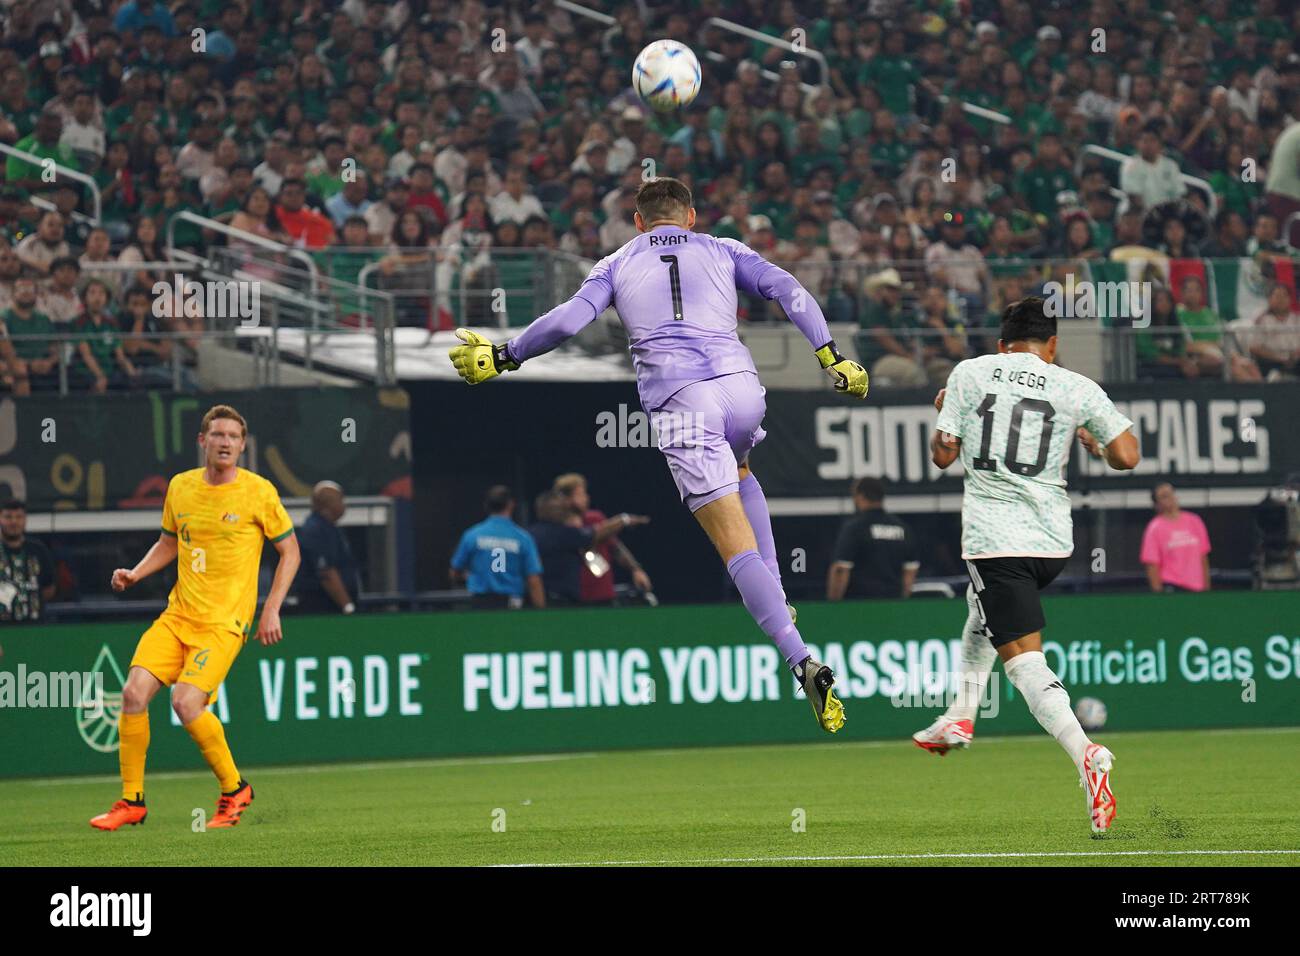 Arlington, Texas, United States: Australian goalkeeper Mathew Ryan hist the header during the international soccer game between Mexico and Australia played at AT&T Stadium on Saturday September 9, 2023.  (Photo by Javier Vicencio / Eyepix Group/Sipa USA) Stock Photo